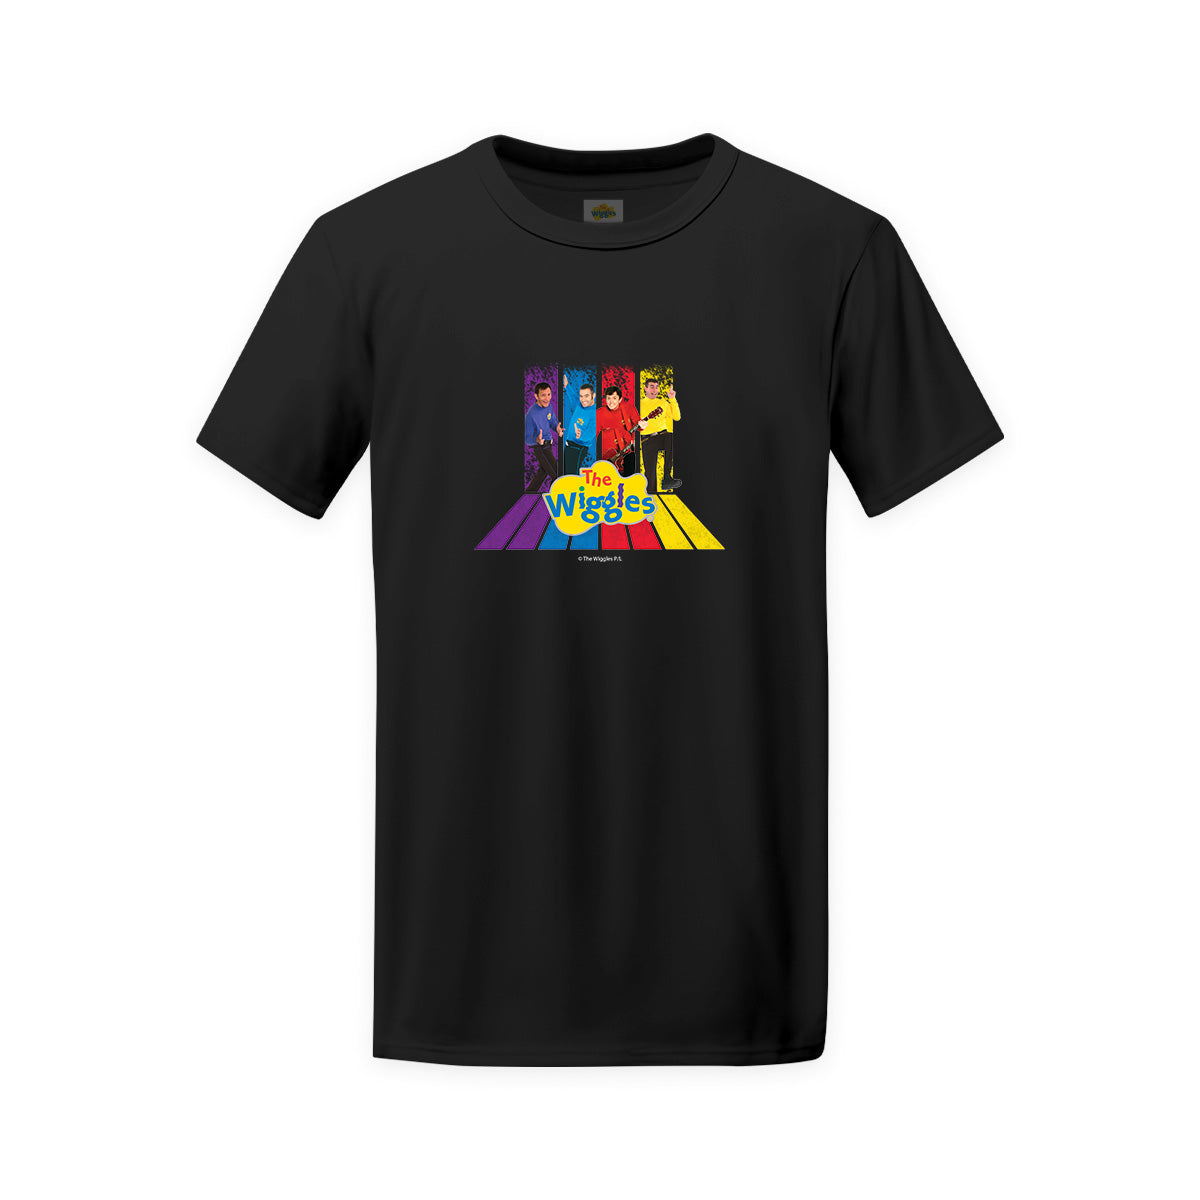 The Wiggles Youth Original Wiggles Retro Short Sleeve T-Shirt